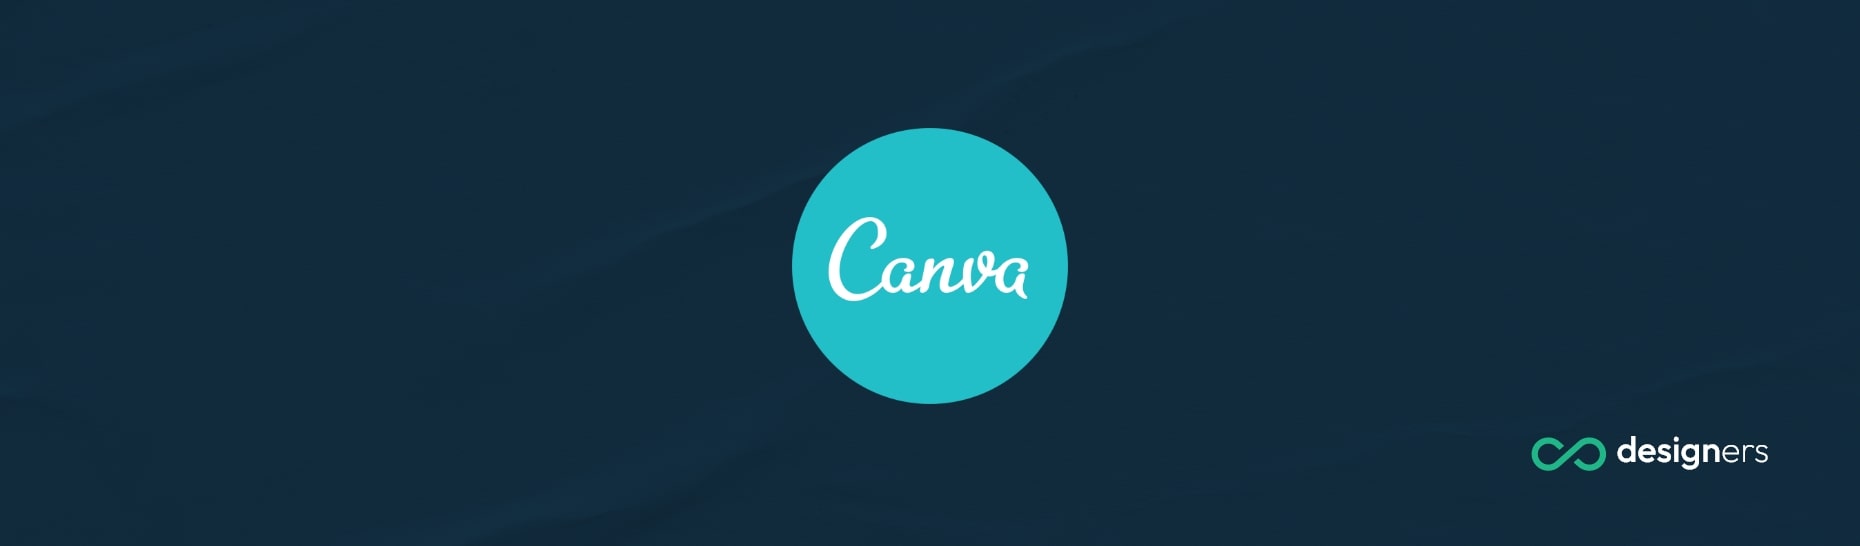 What Is the Meme Font Called on Canva?